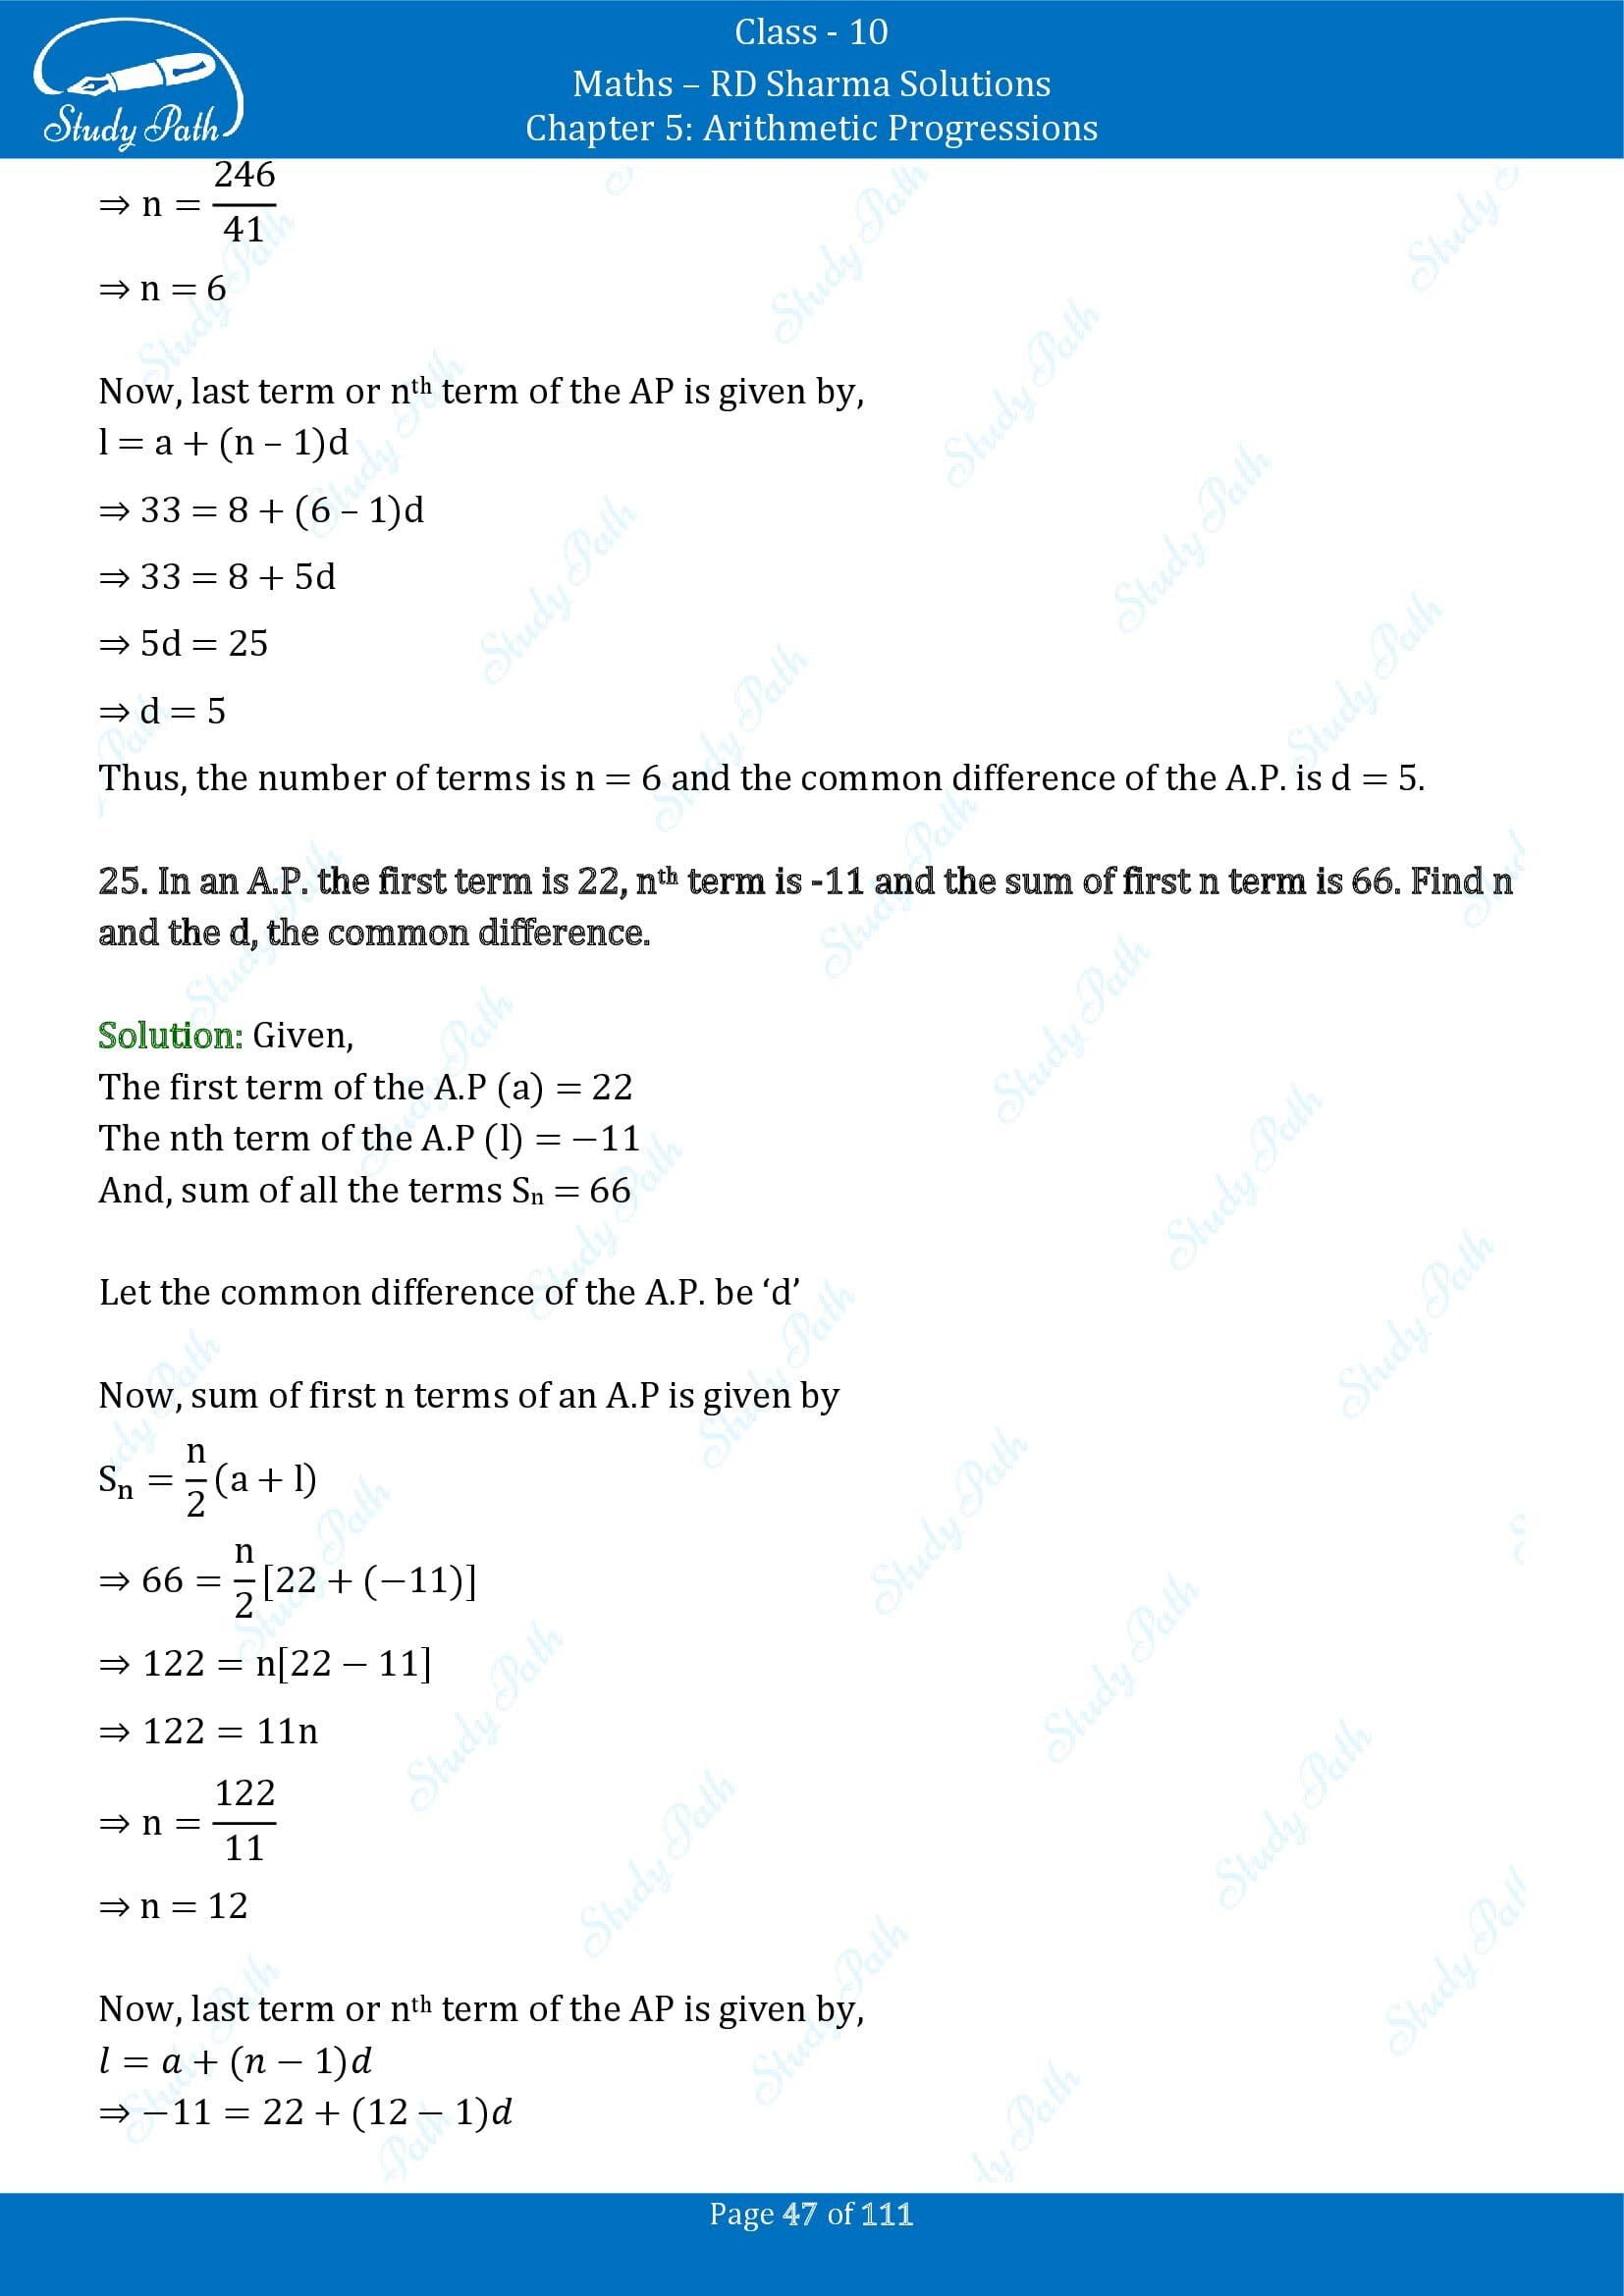 RD Sharma Solutions Class 10 Chapter 5 Arithmetic Progressions Exercise 5.6 00047